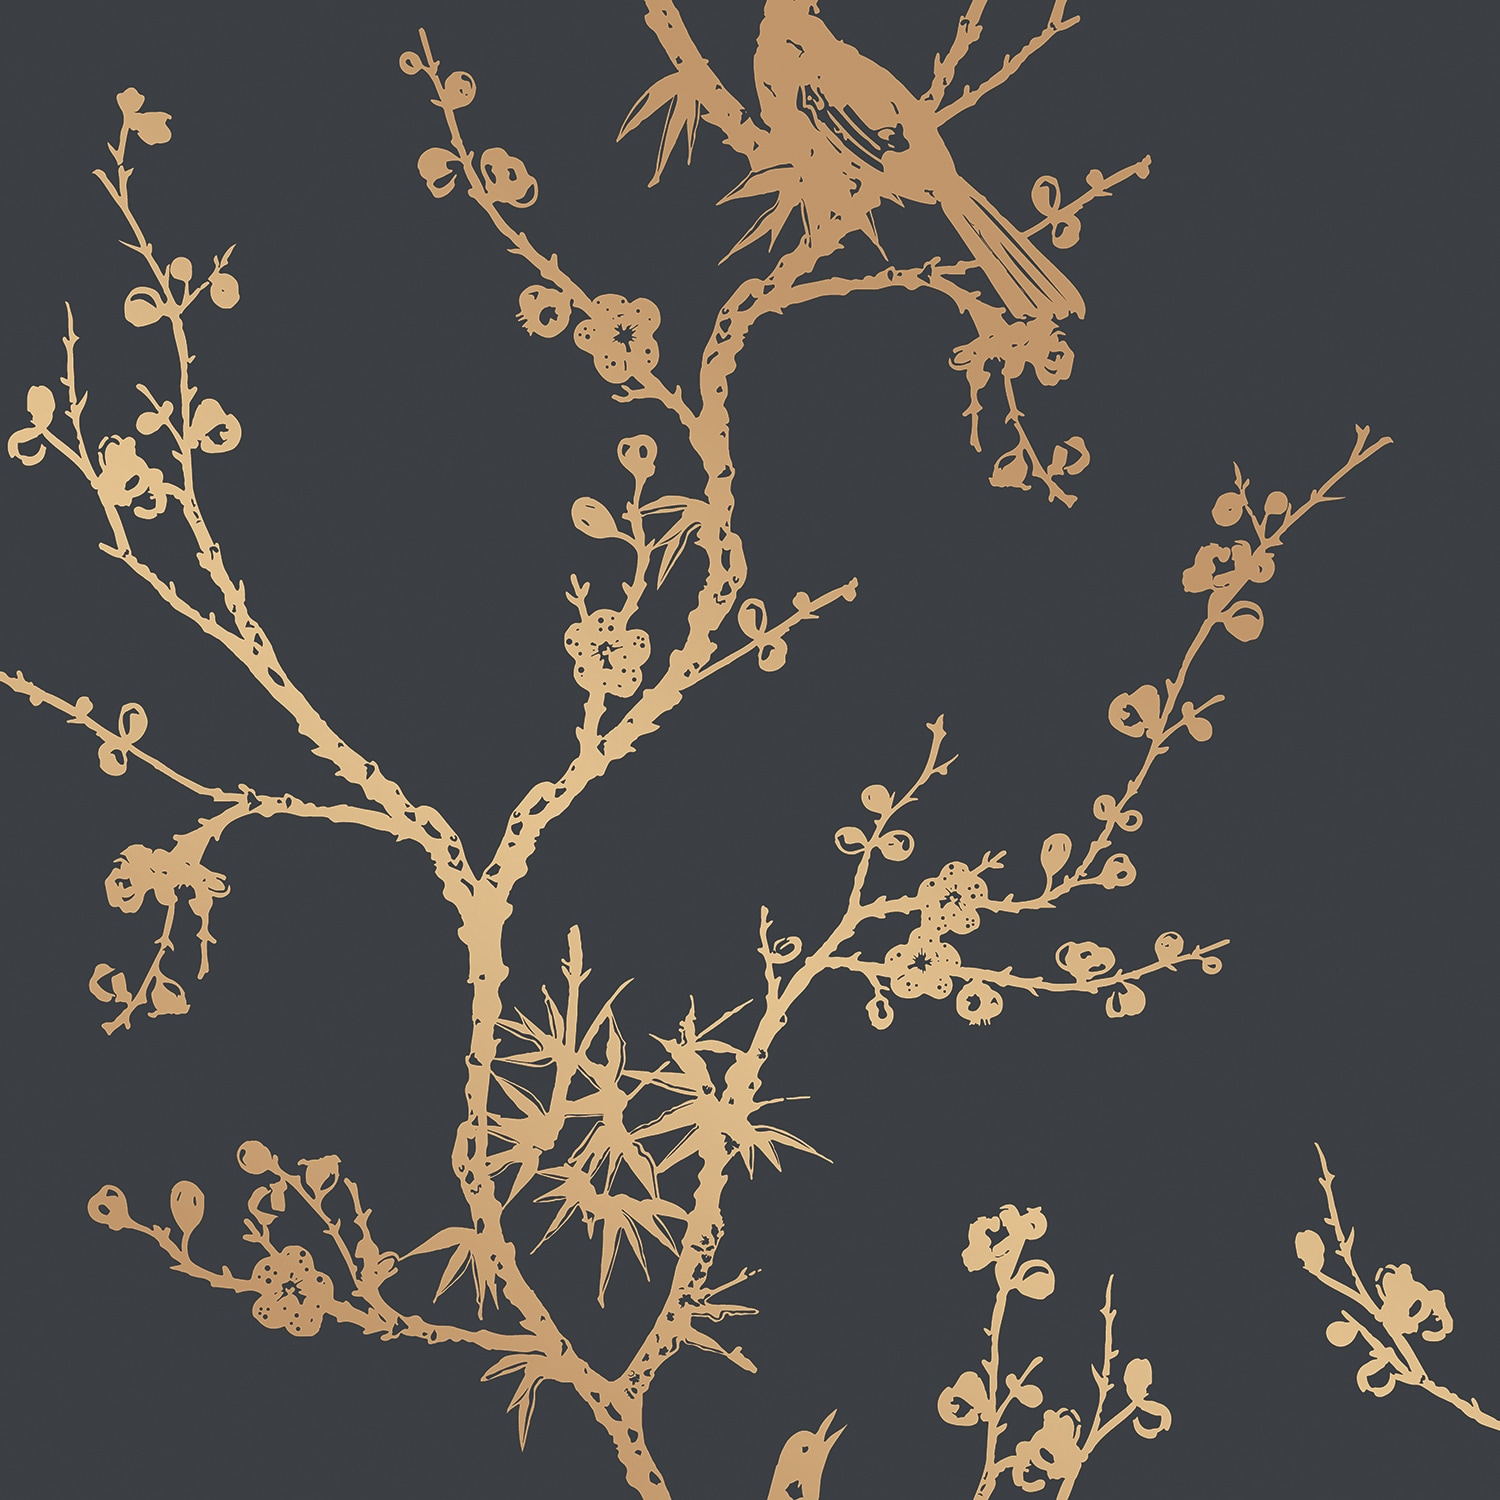 Tempaper Cynthia Rowley for Tempaper 60-sq ft Black and Gold Vinyl  Chinoiserie Self-adhesive Peel and Stick Wallpaper in the Wallpaper  department at